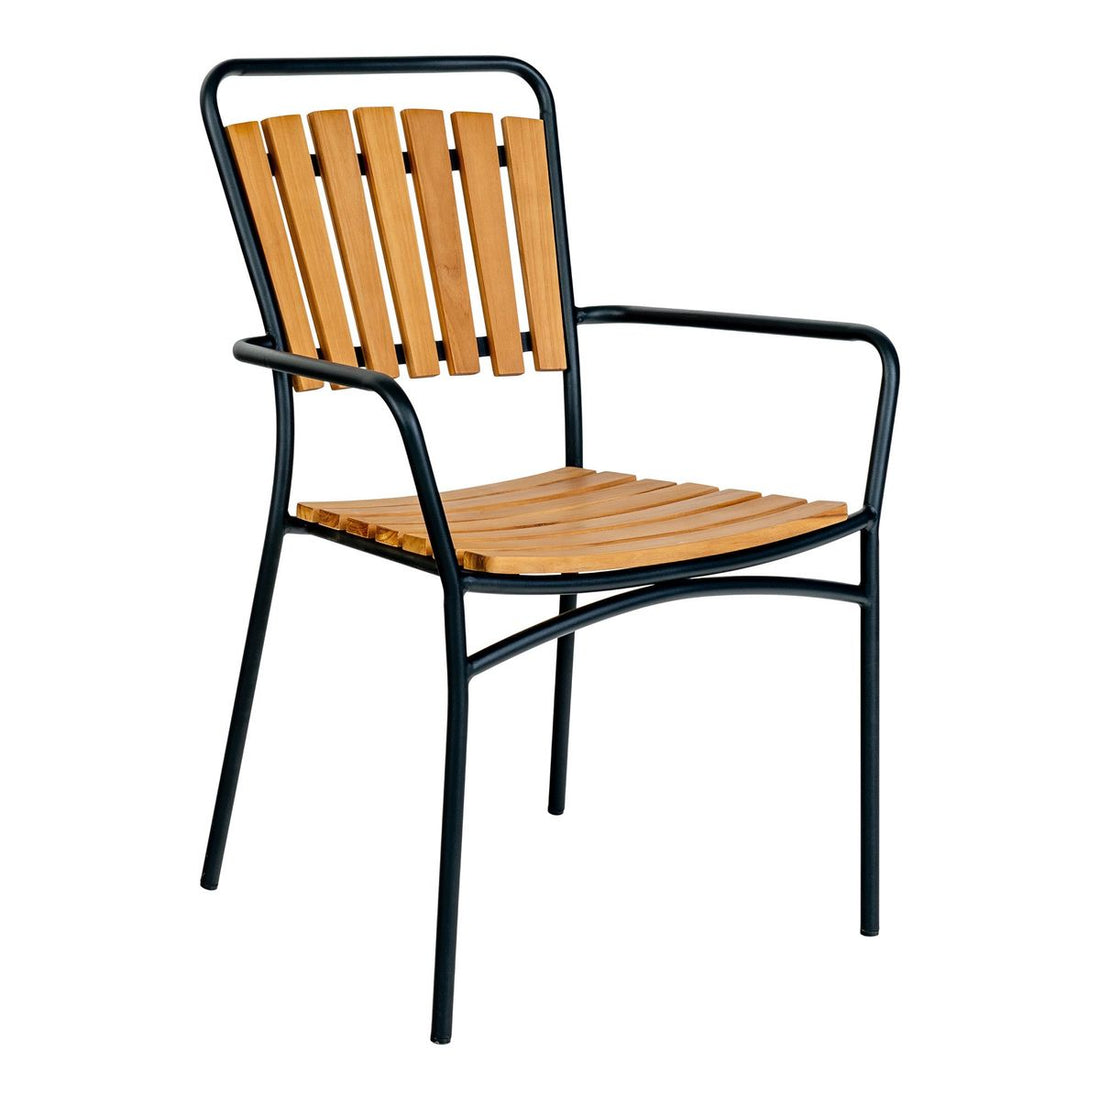 House Nordic Cleveland Dining Chair - Set of 4